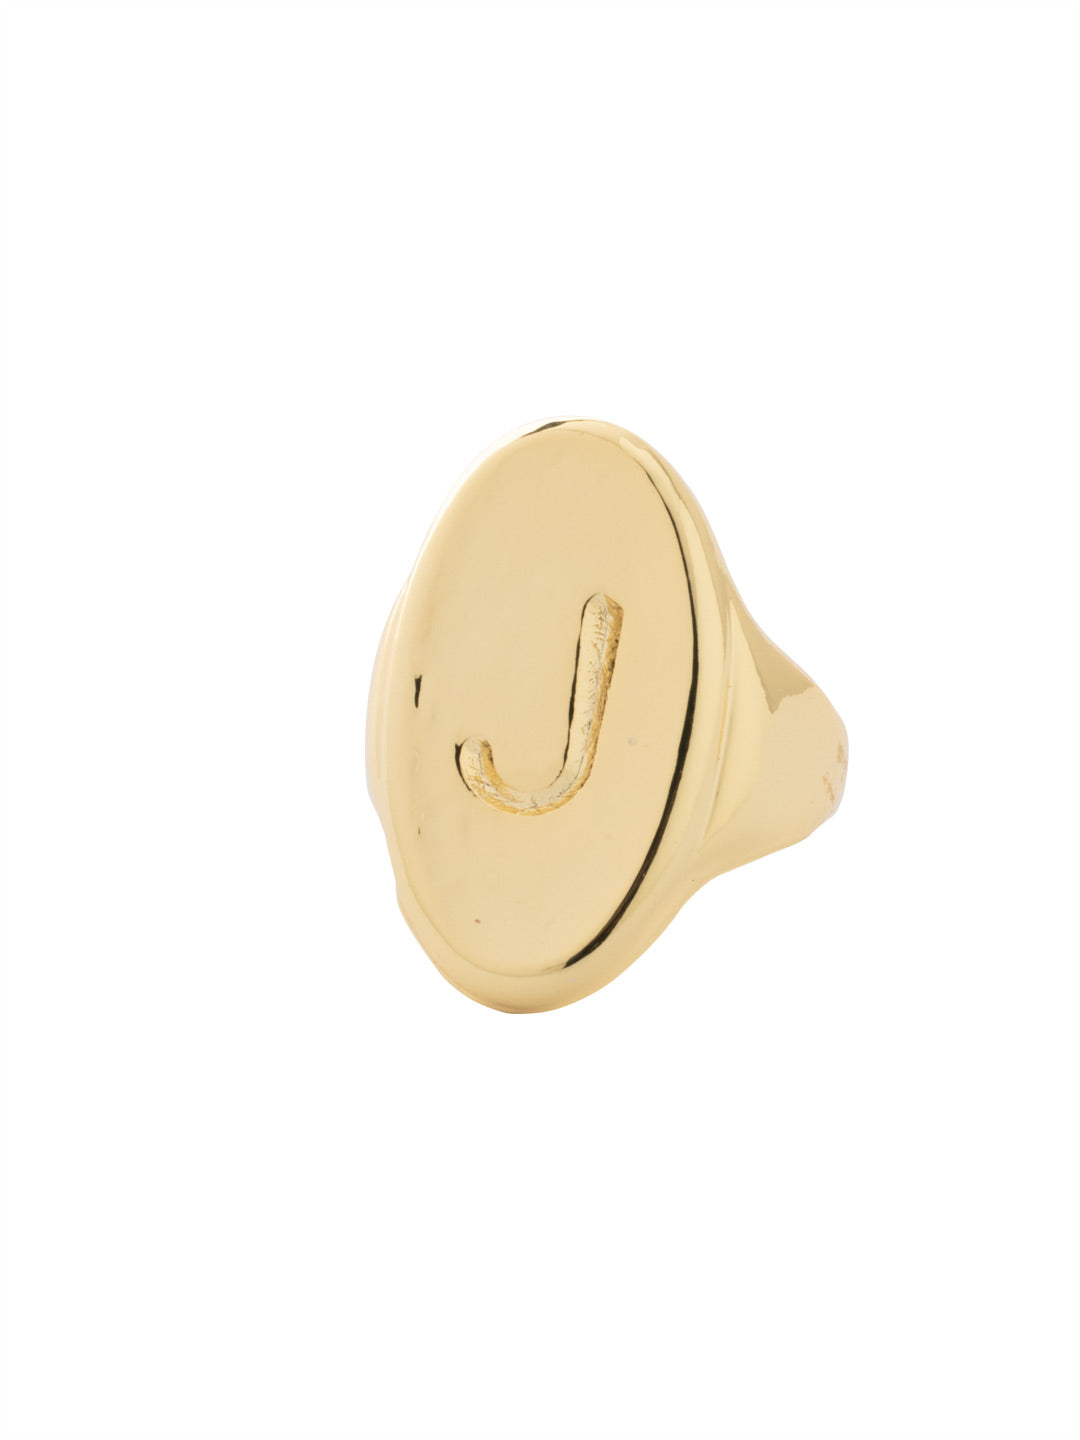 "J" Signet Statement Ring - RFK39BGMTL - <p>The Signet Statement Ring features a capital letter stamped into an oblong metal disk on an adjustable ring band. From Sorrelli's Bare Metallic collection in our Bright Gold-tone finish.</p>